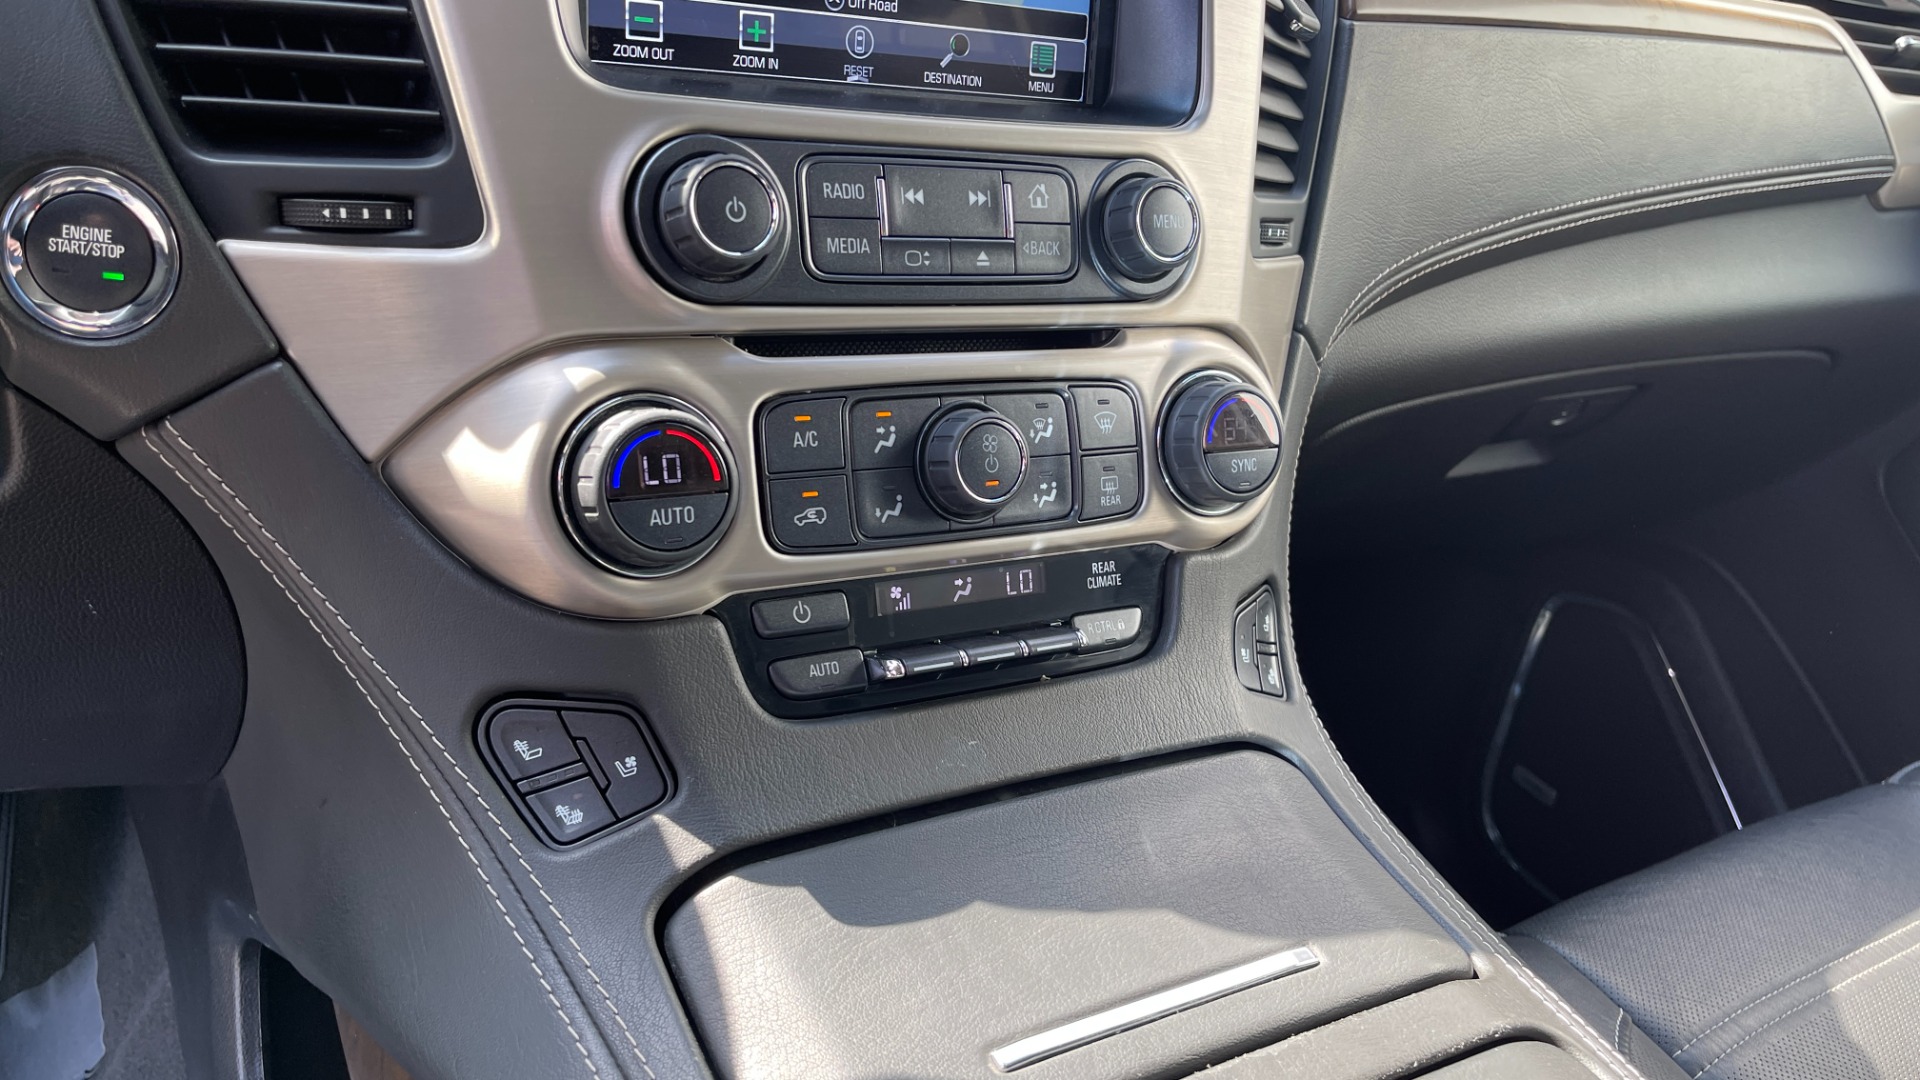 Used 2019 GMC Yukon XL DENALI / LEATHER / 4WD / CAPTAINS CHAIRS / 3 ROW SEATING for sale $55,000 at Formula Imports in Charlotte NC 28227 20